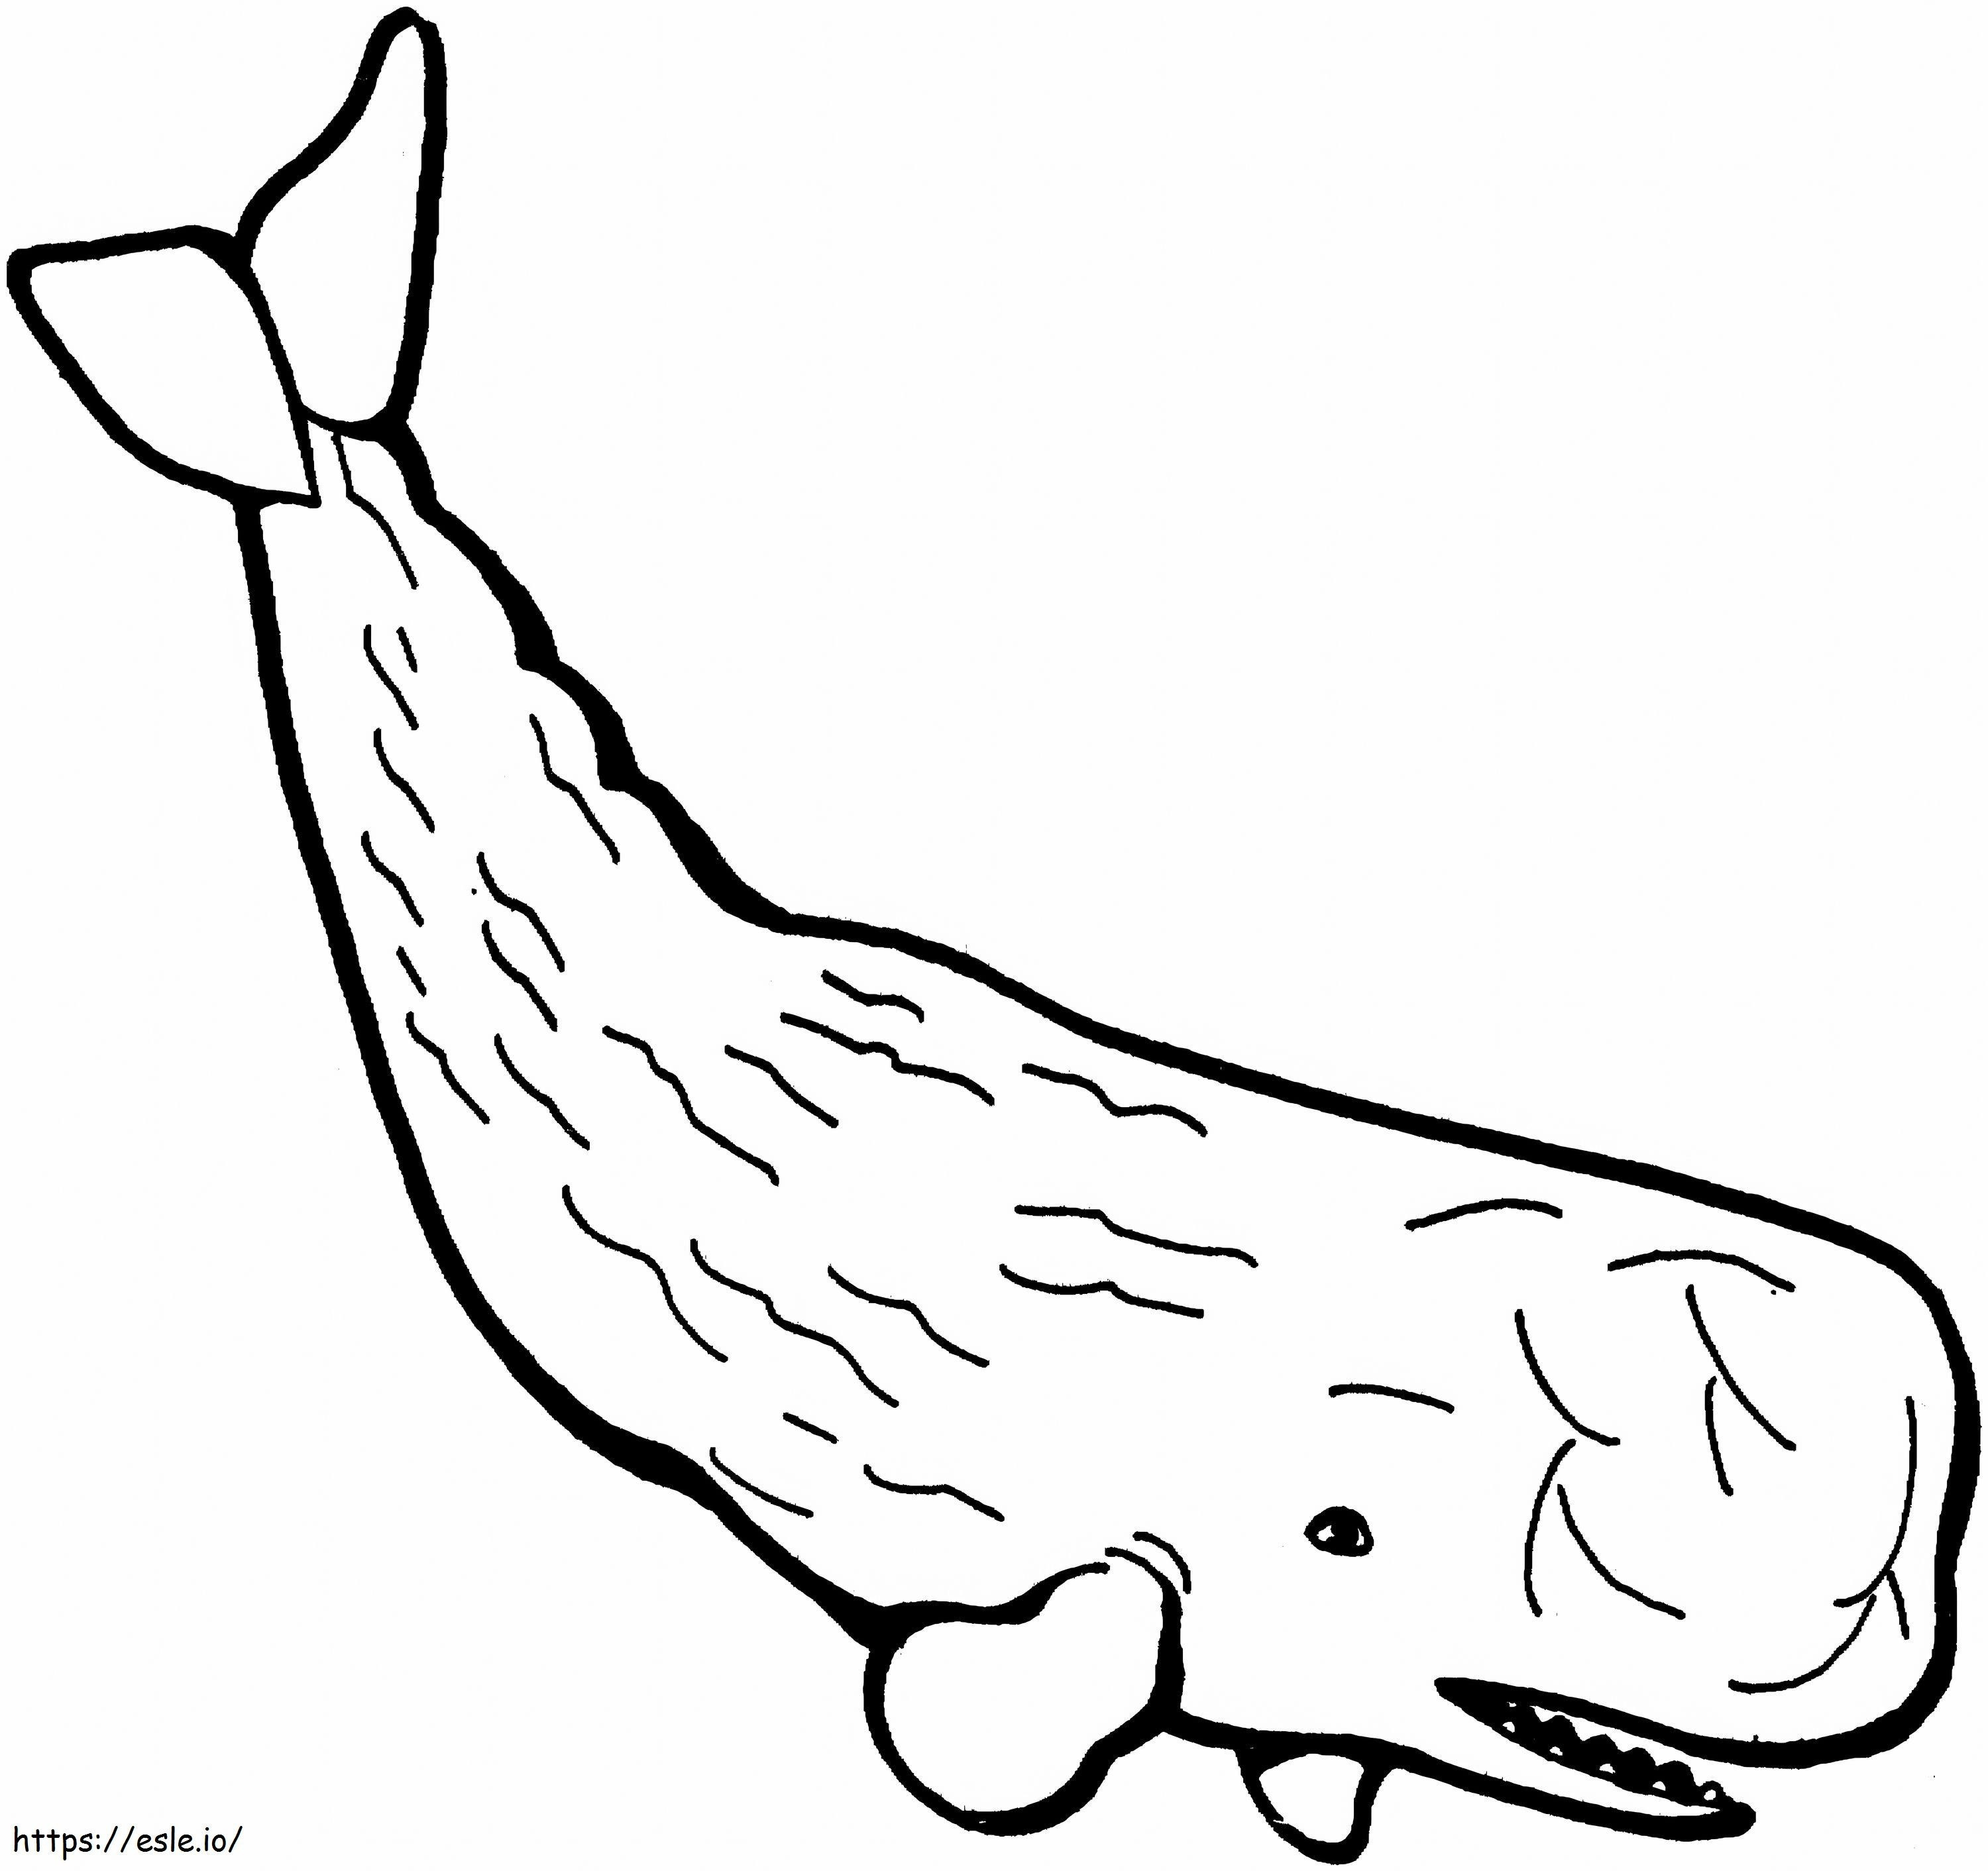 1541748078 Whale Valid Sperm Page Of 12 coloring page